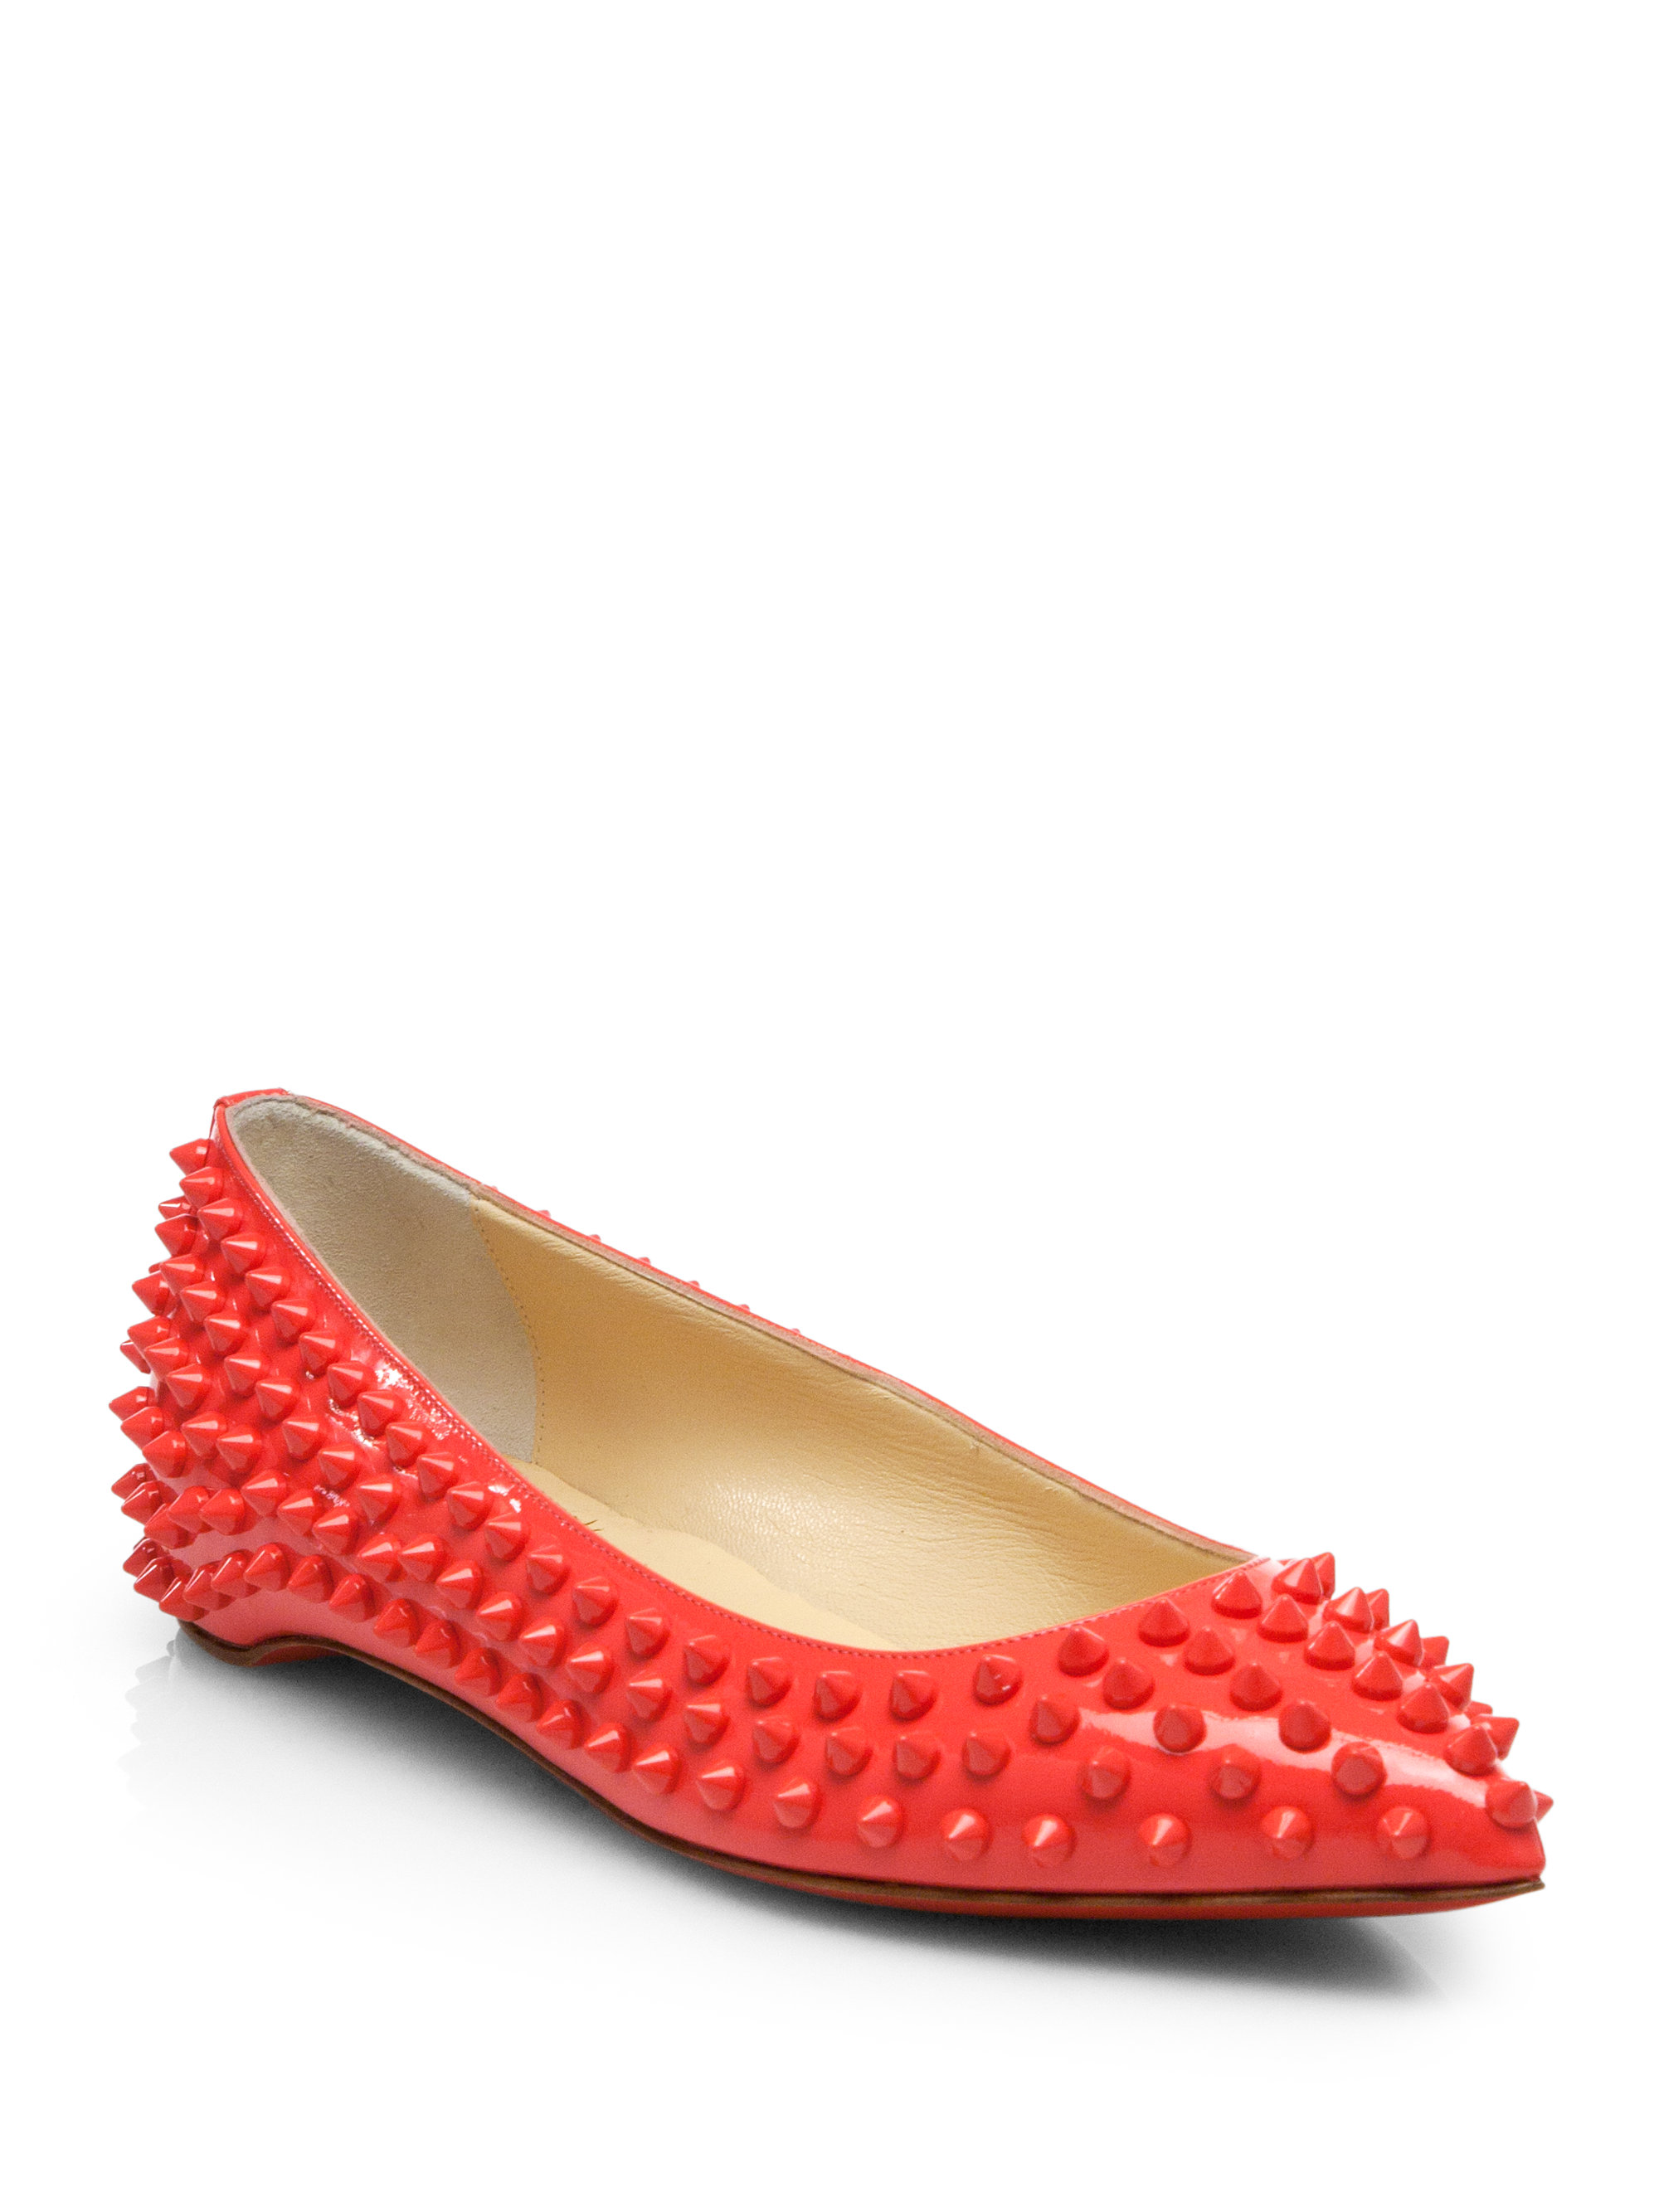 Christian louboutin Pigalle Spiked Patent Leather Flats in Red ...